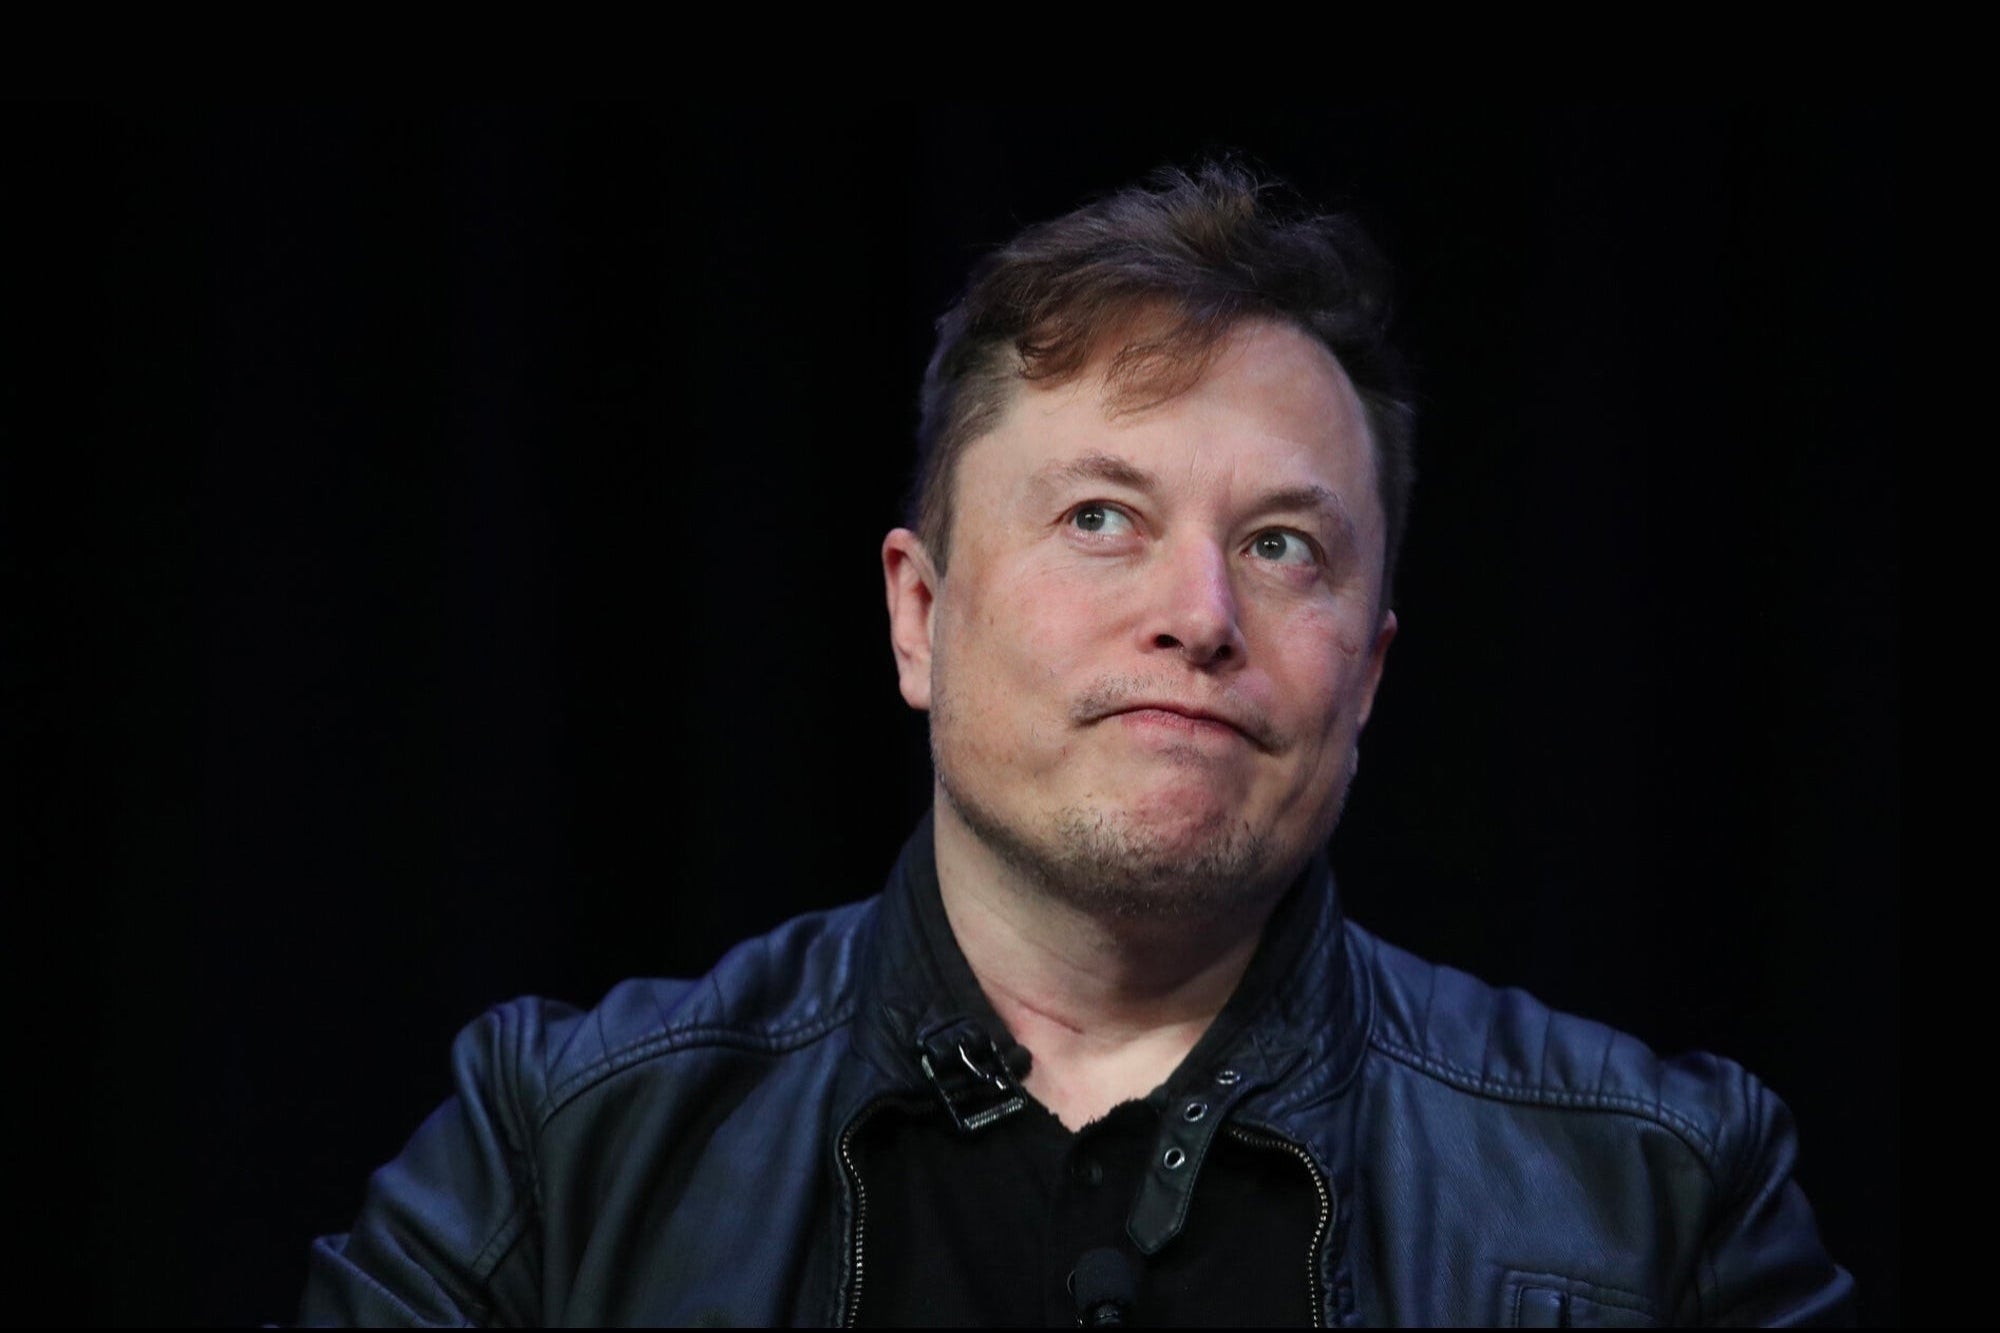 Elon Musk is no longer the second richest person in the world, look who beat him